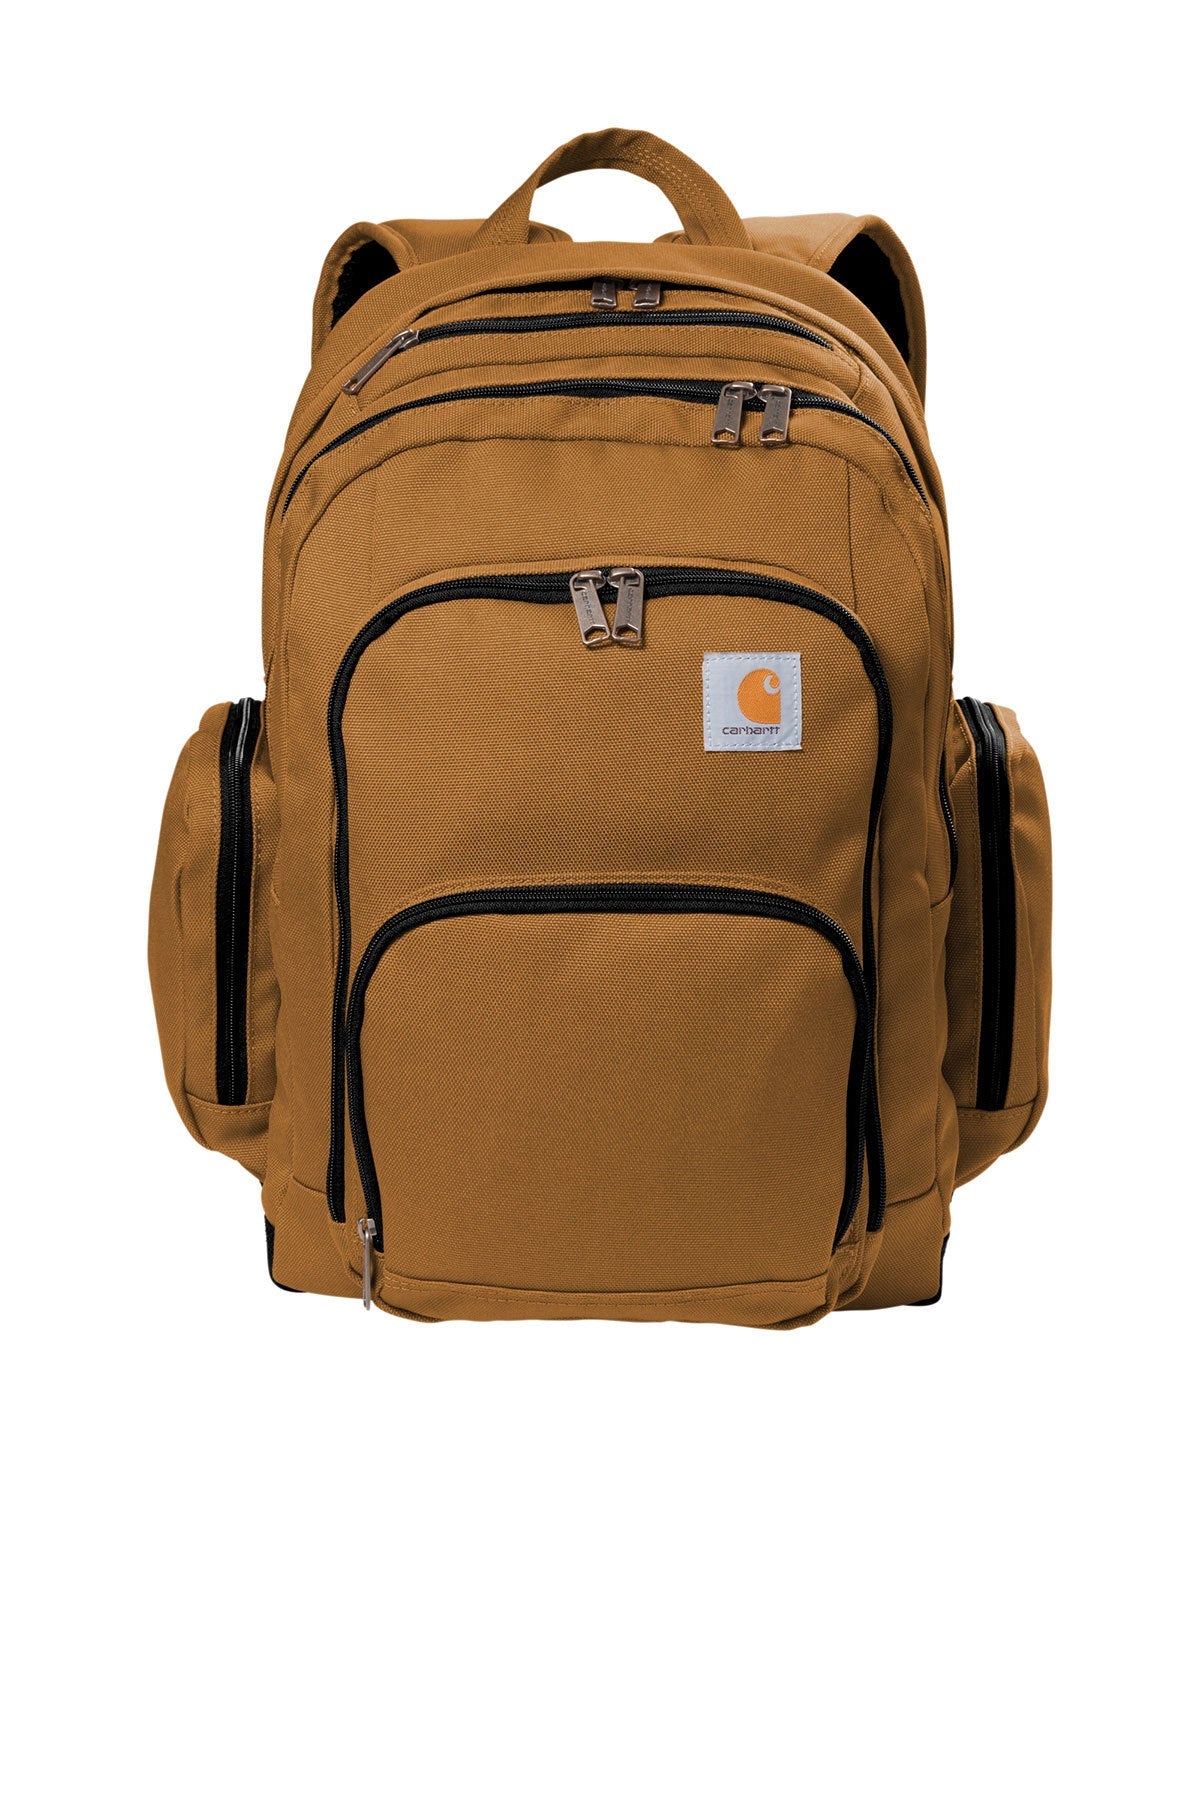 Carhartt® - Foundry Series Pro Backpack - CT89176508